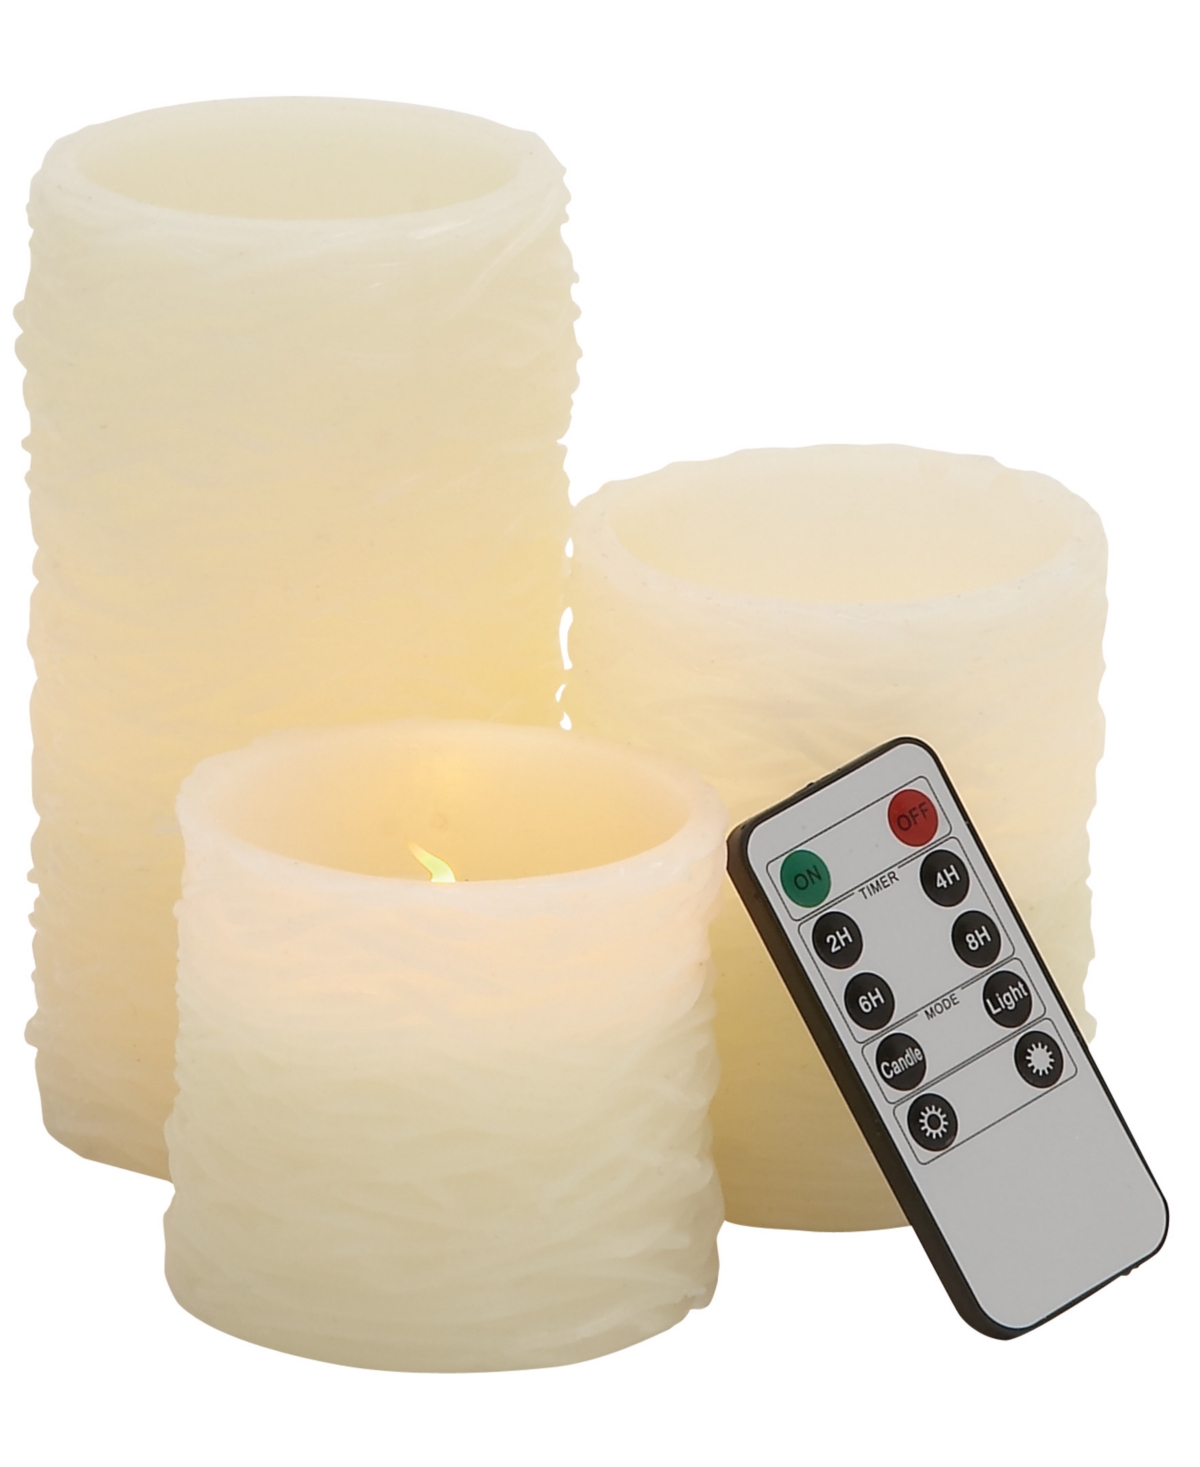 Traditional Flameless Candle, Set of 3 - Cream